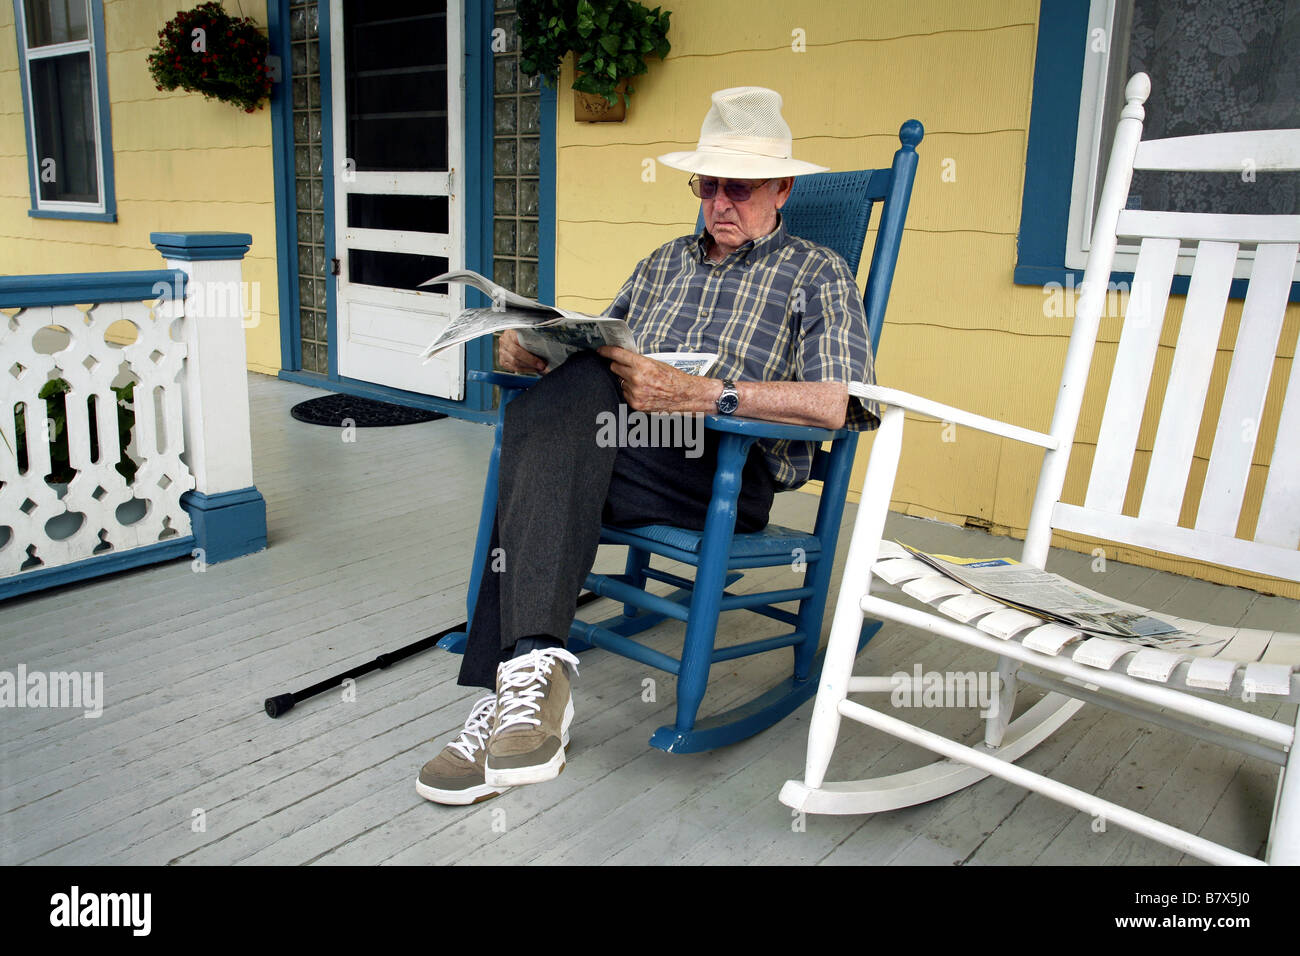 Reading Local Newspaper, Cape May, New Jersy, USA Stock Photo